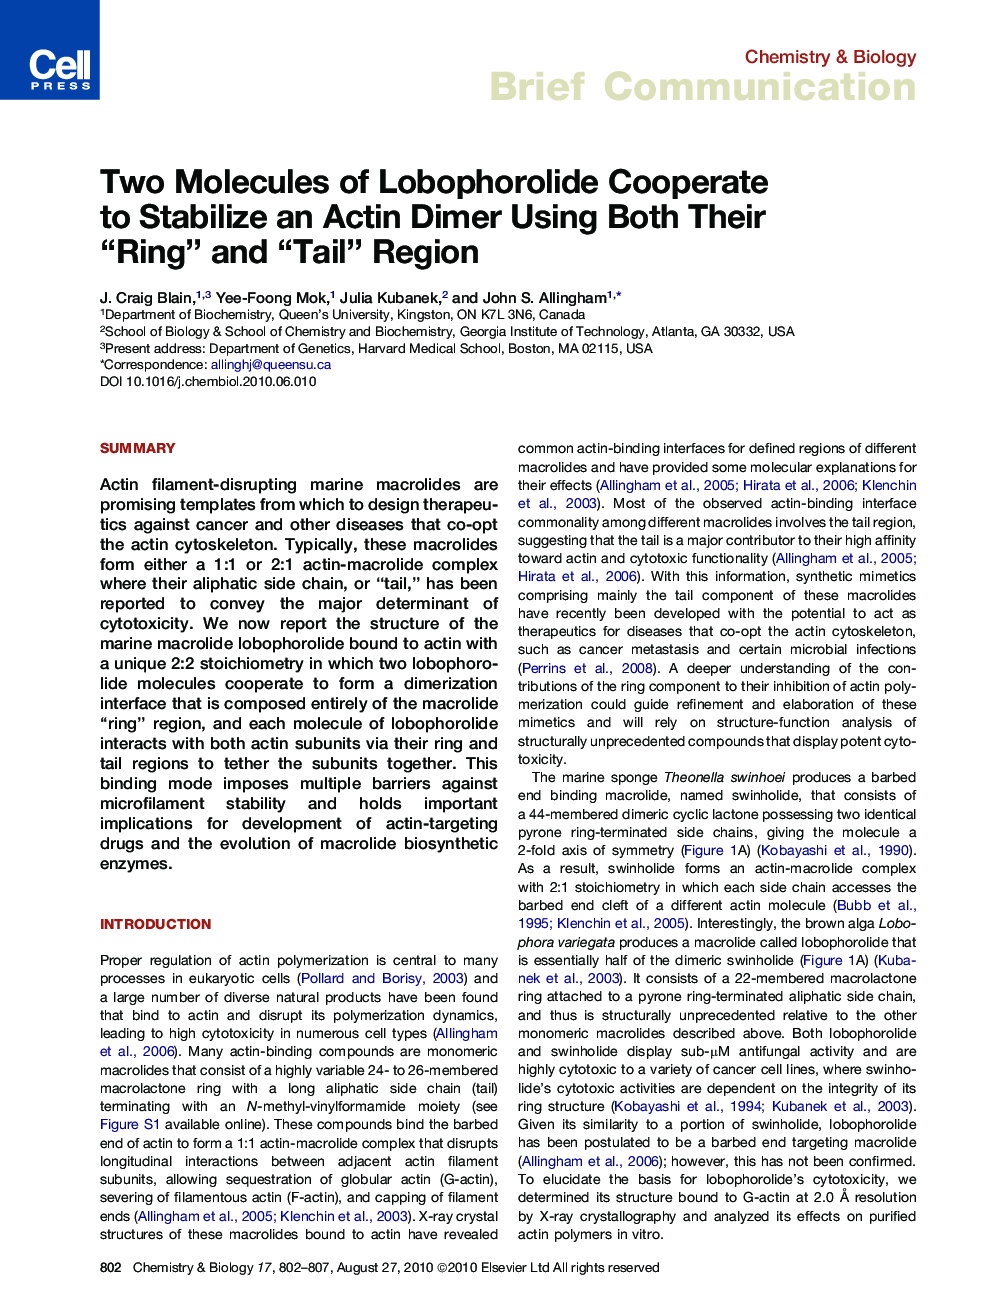 Two Molecules of Lobophorolide Cooperate to Stabilize an Actin Dimer Using Both Their “Ring” and “Tail” Region